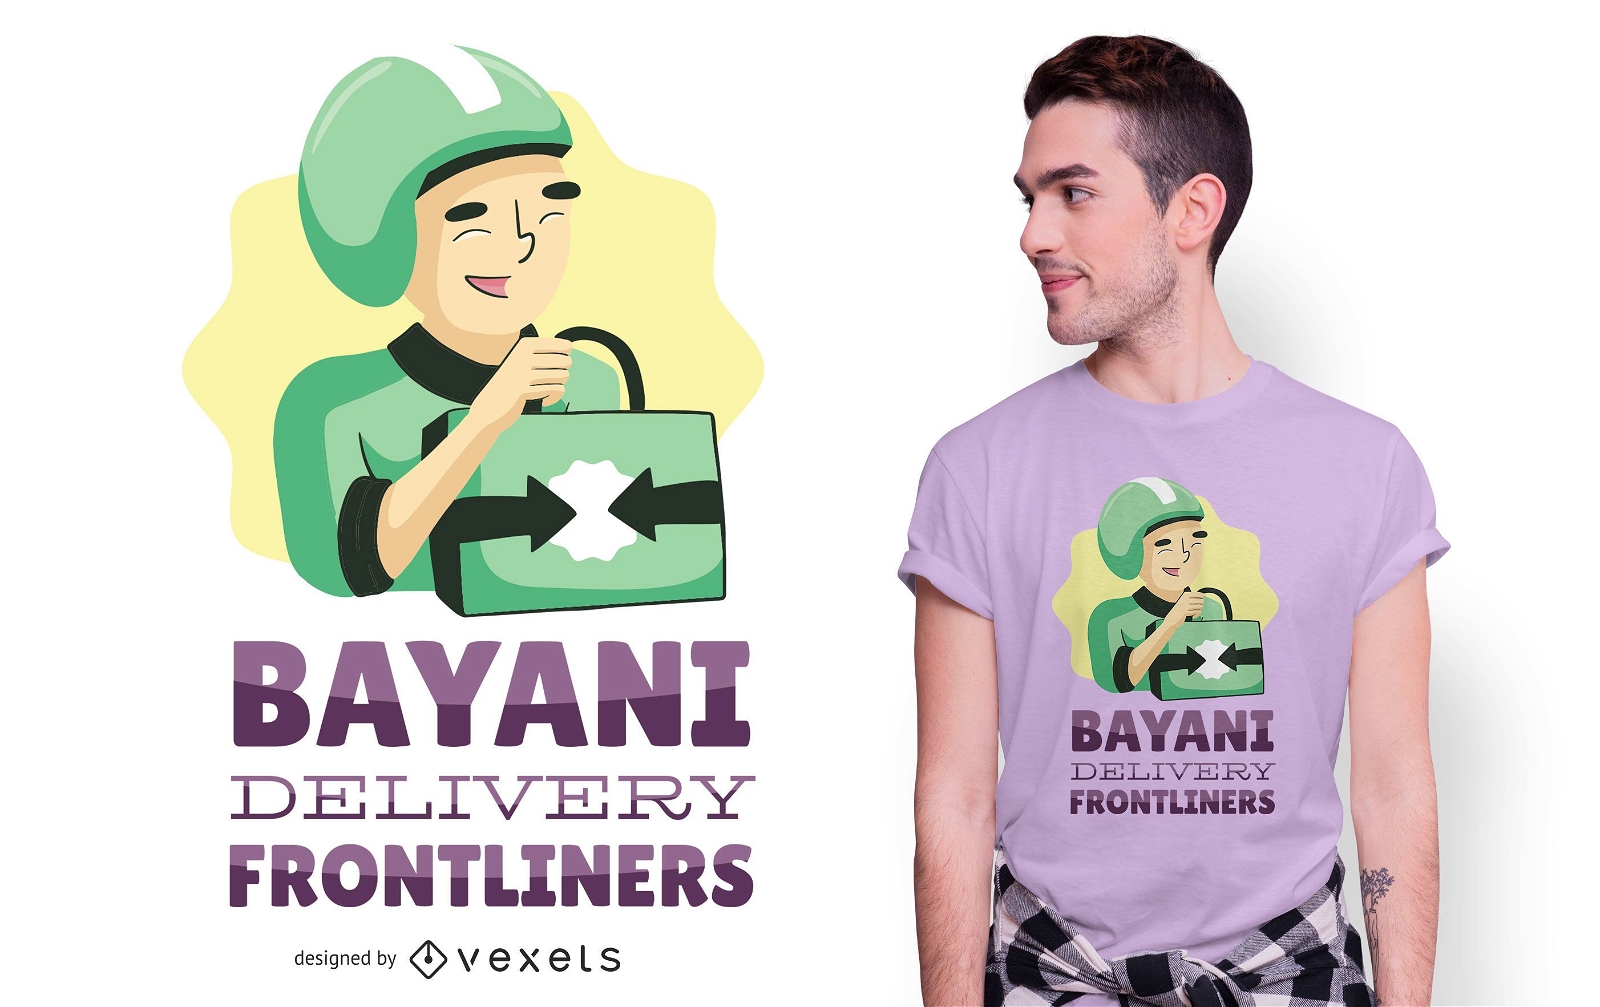 Delivery heroes t-shirt design